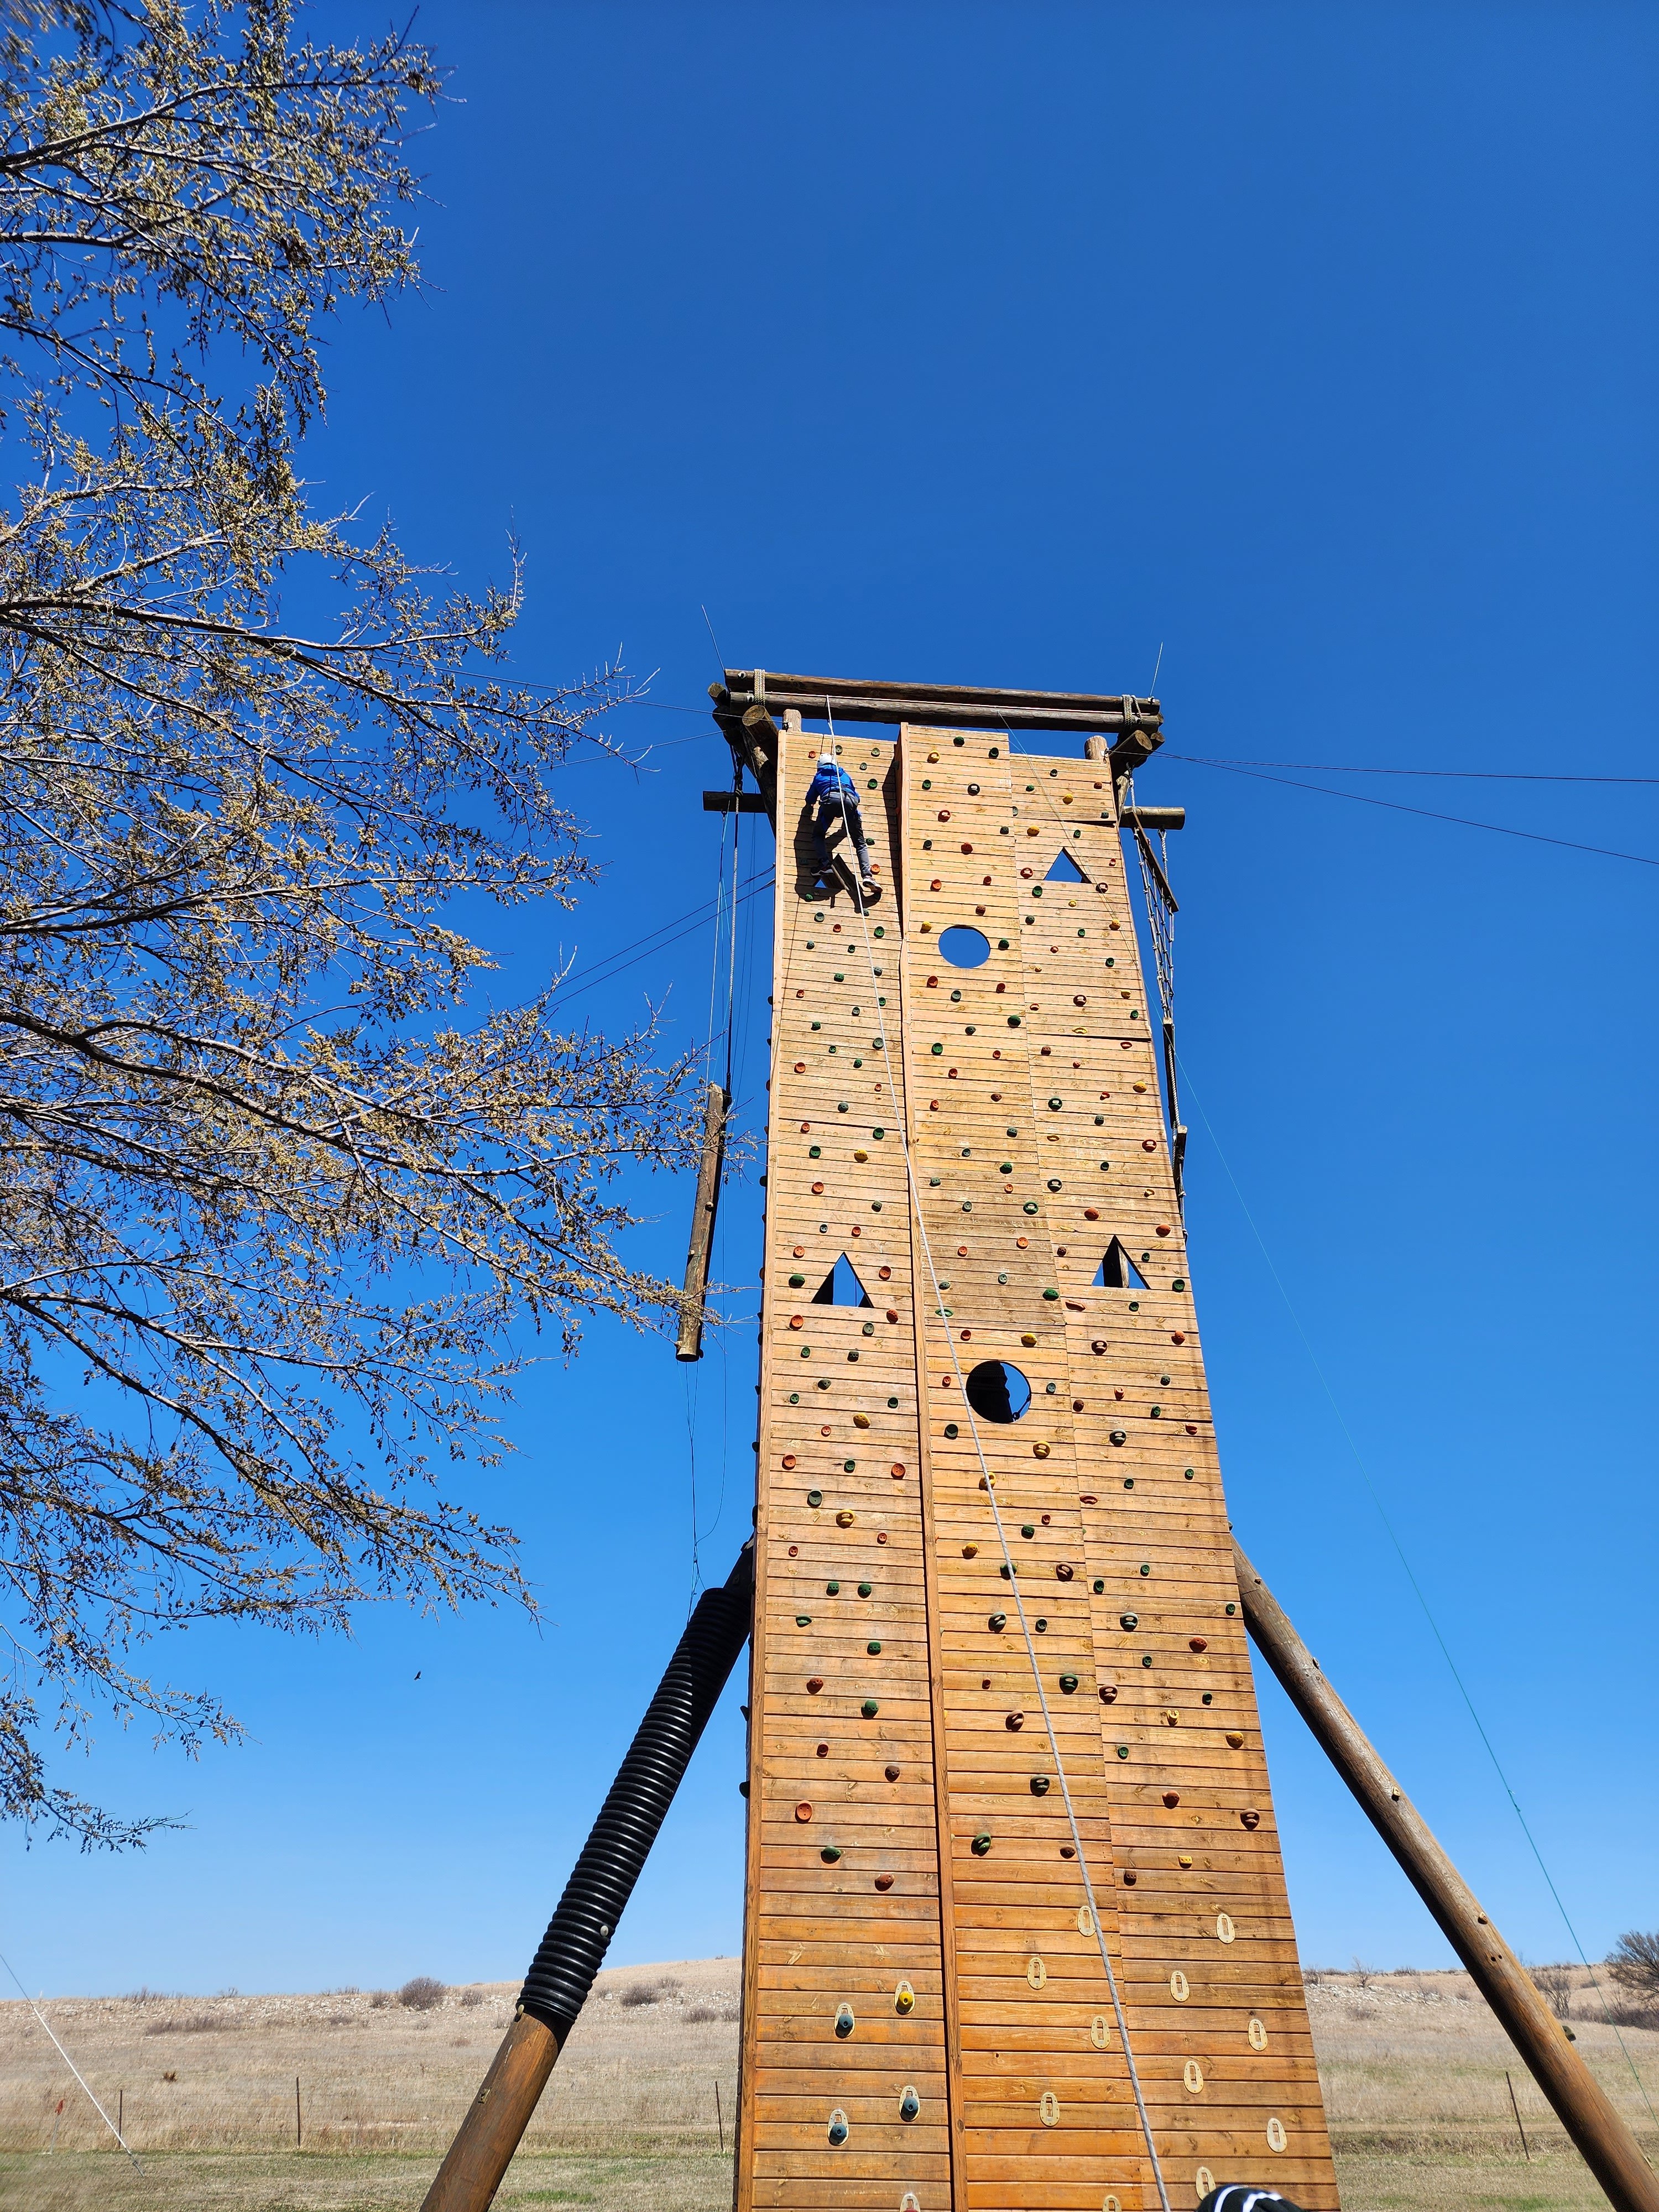 Caleb fearlessly scaled a climbing wall at Camp Wood during a KSSB Weekend event!